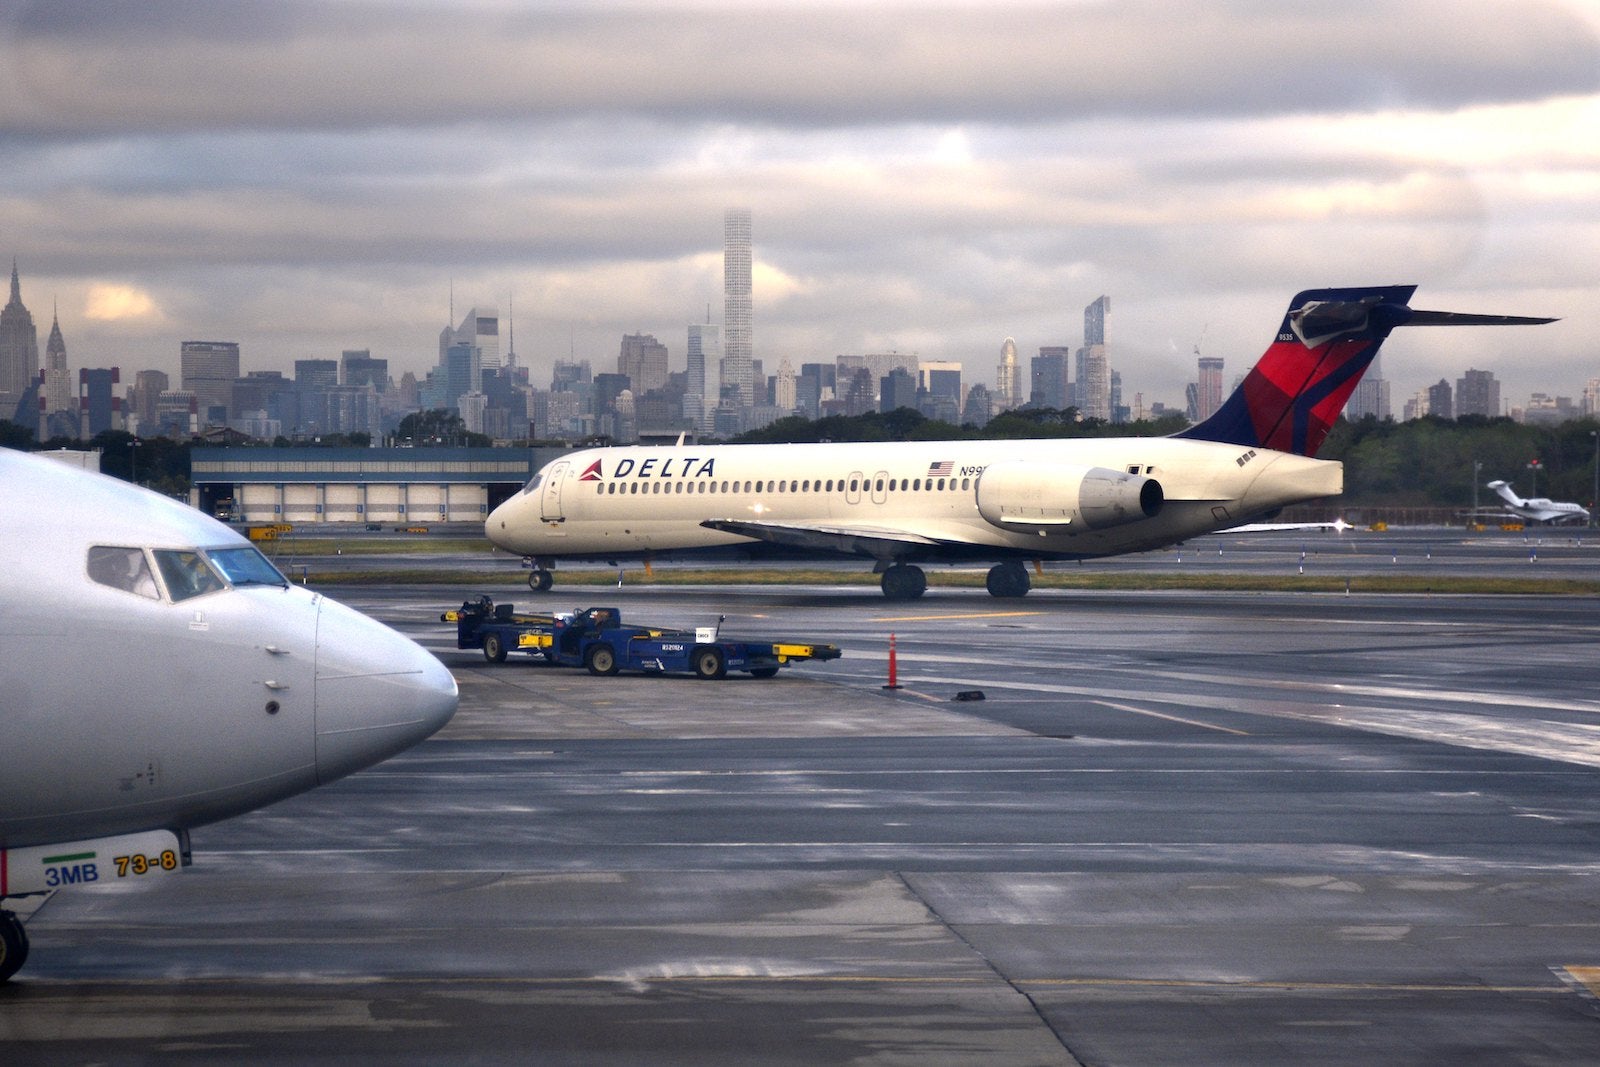 Delta planes on the runway in New York